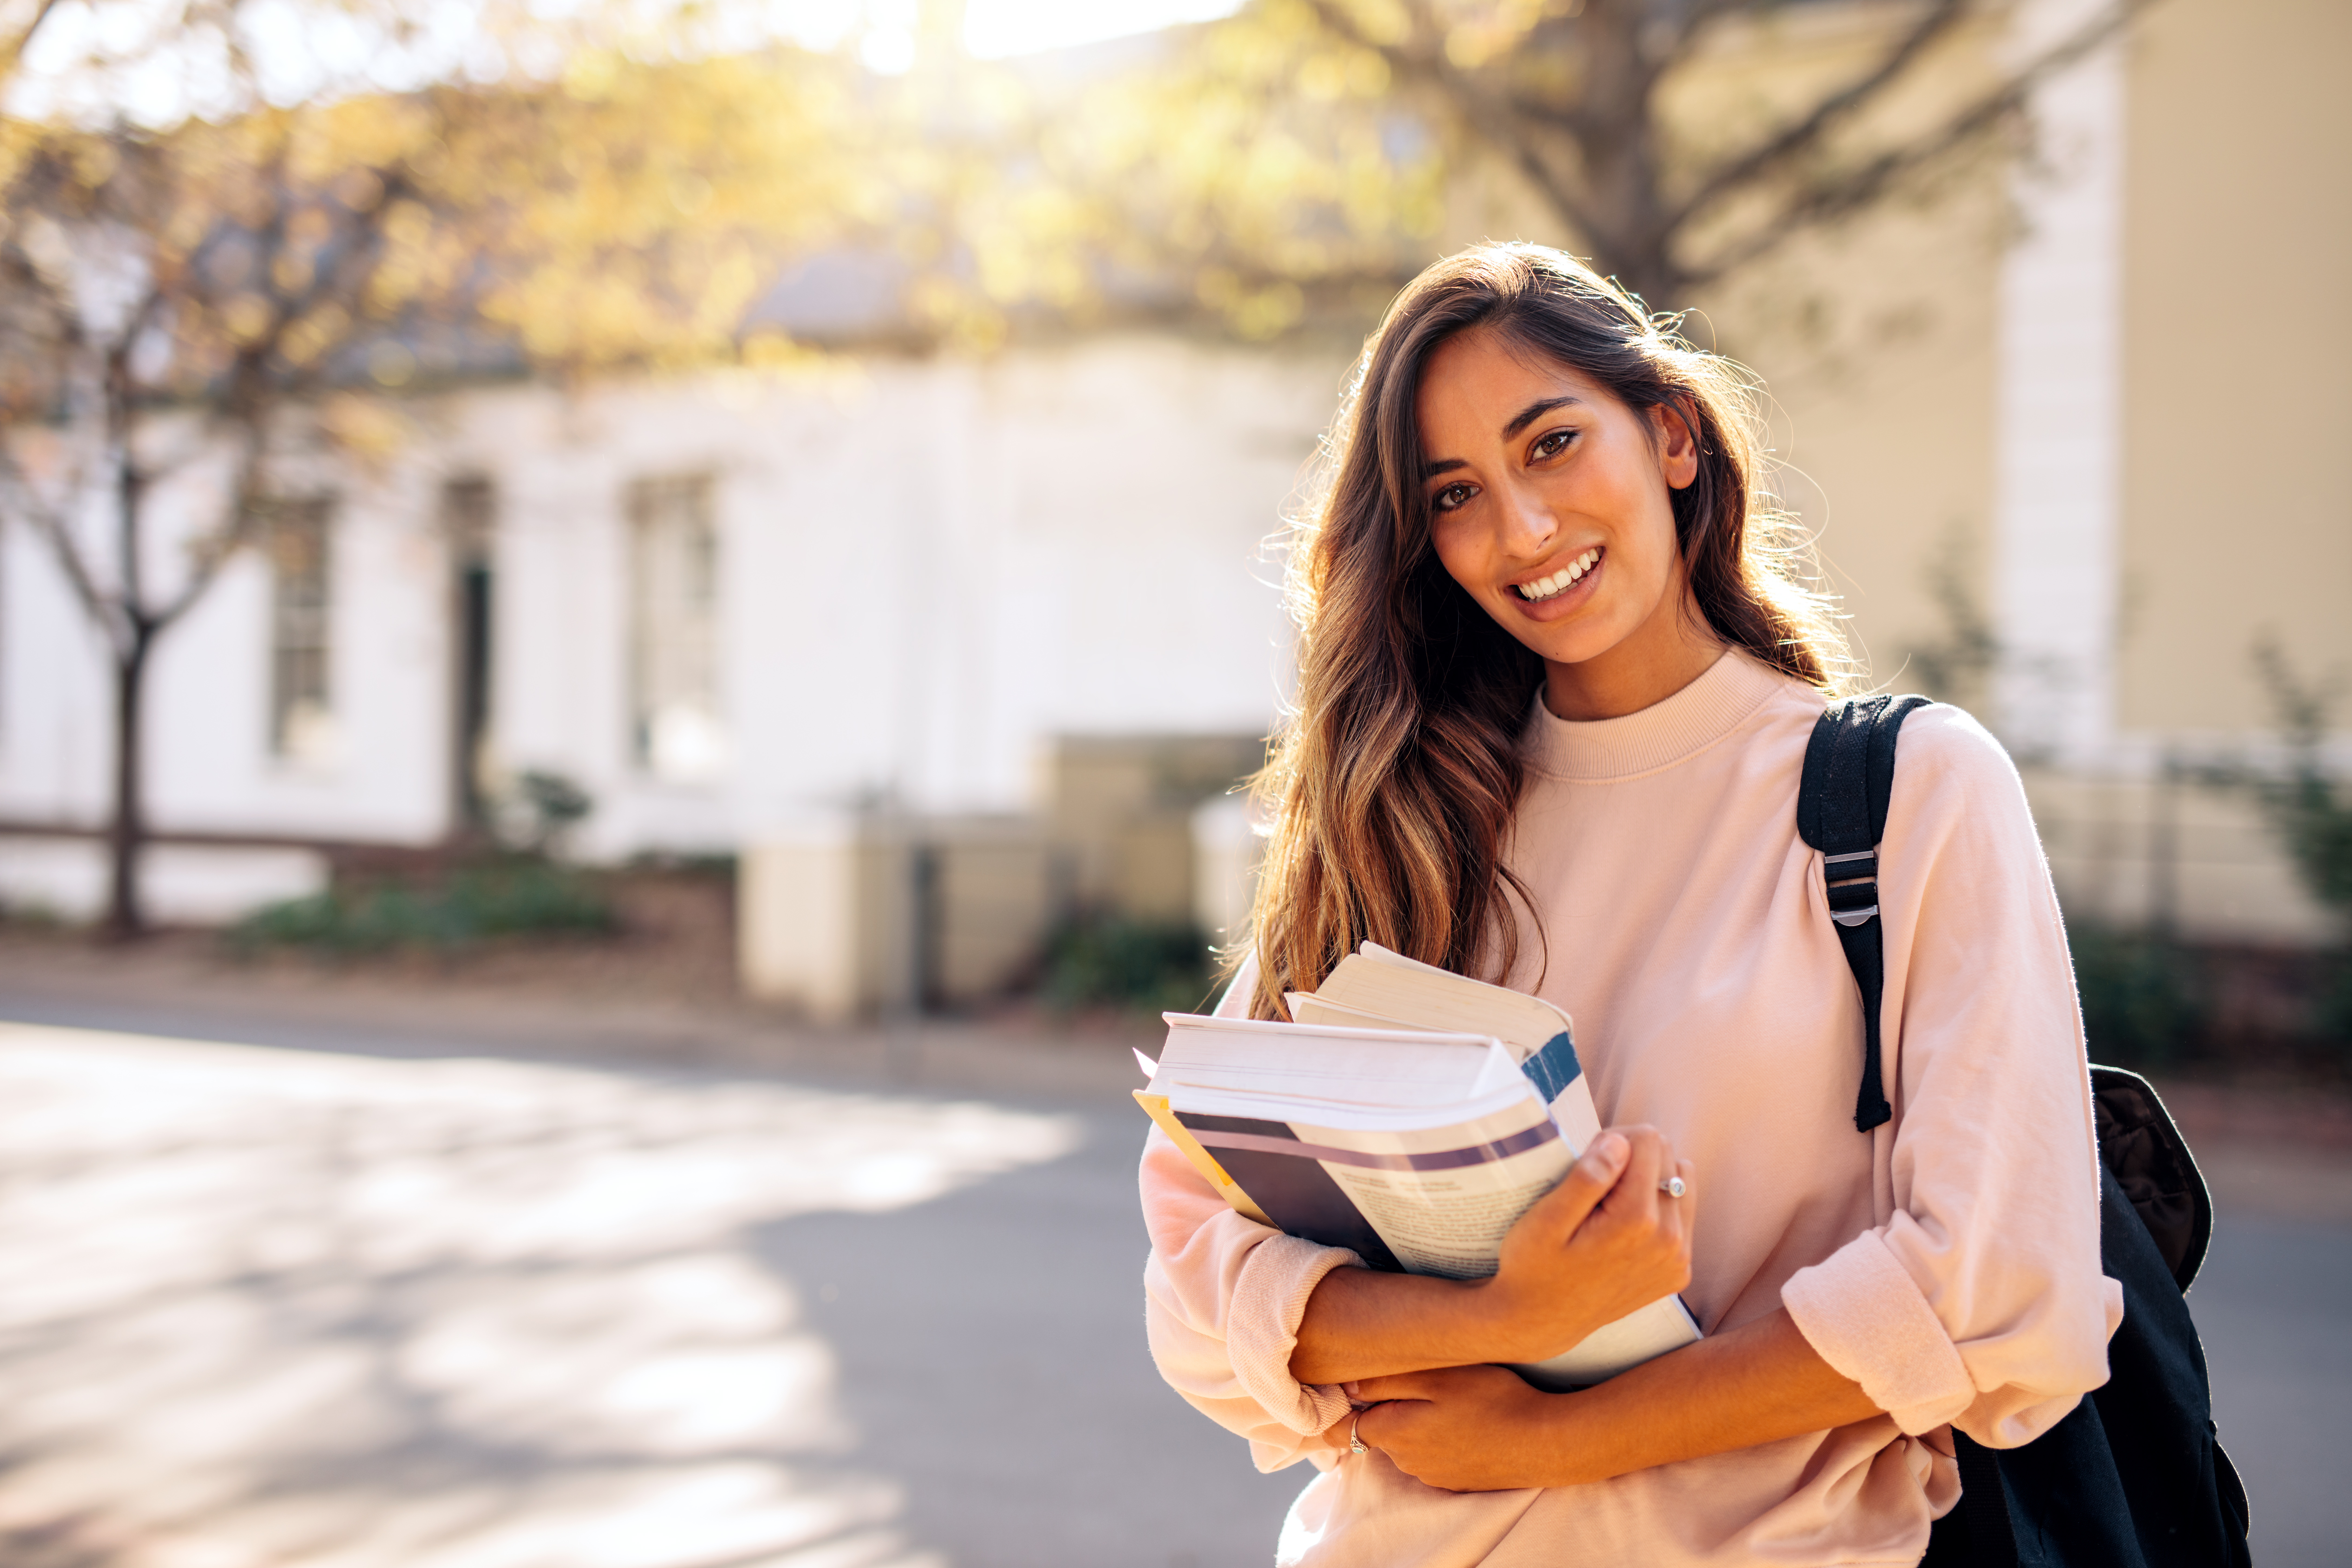 Female college student smiling while holding books.